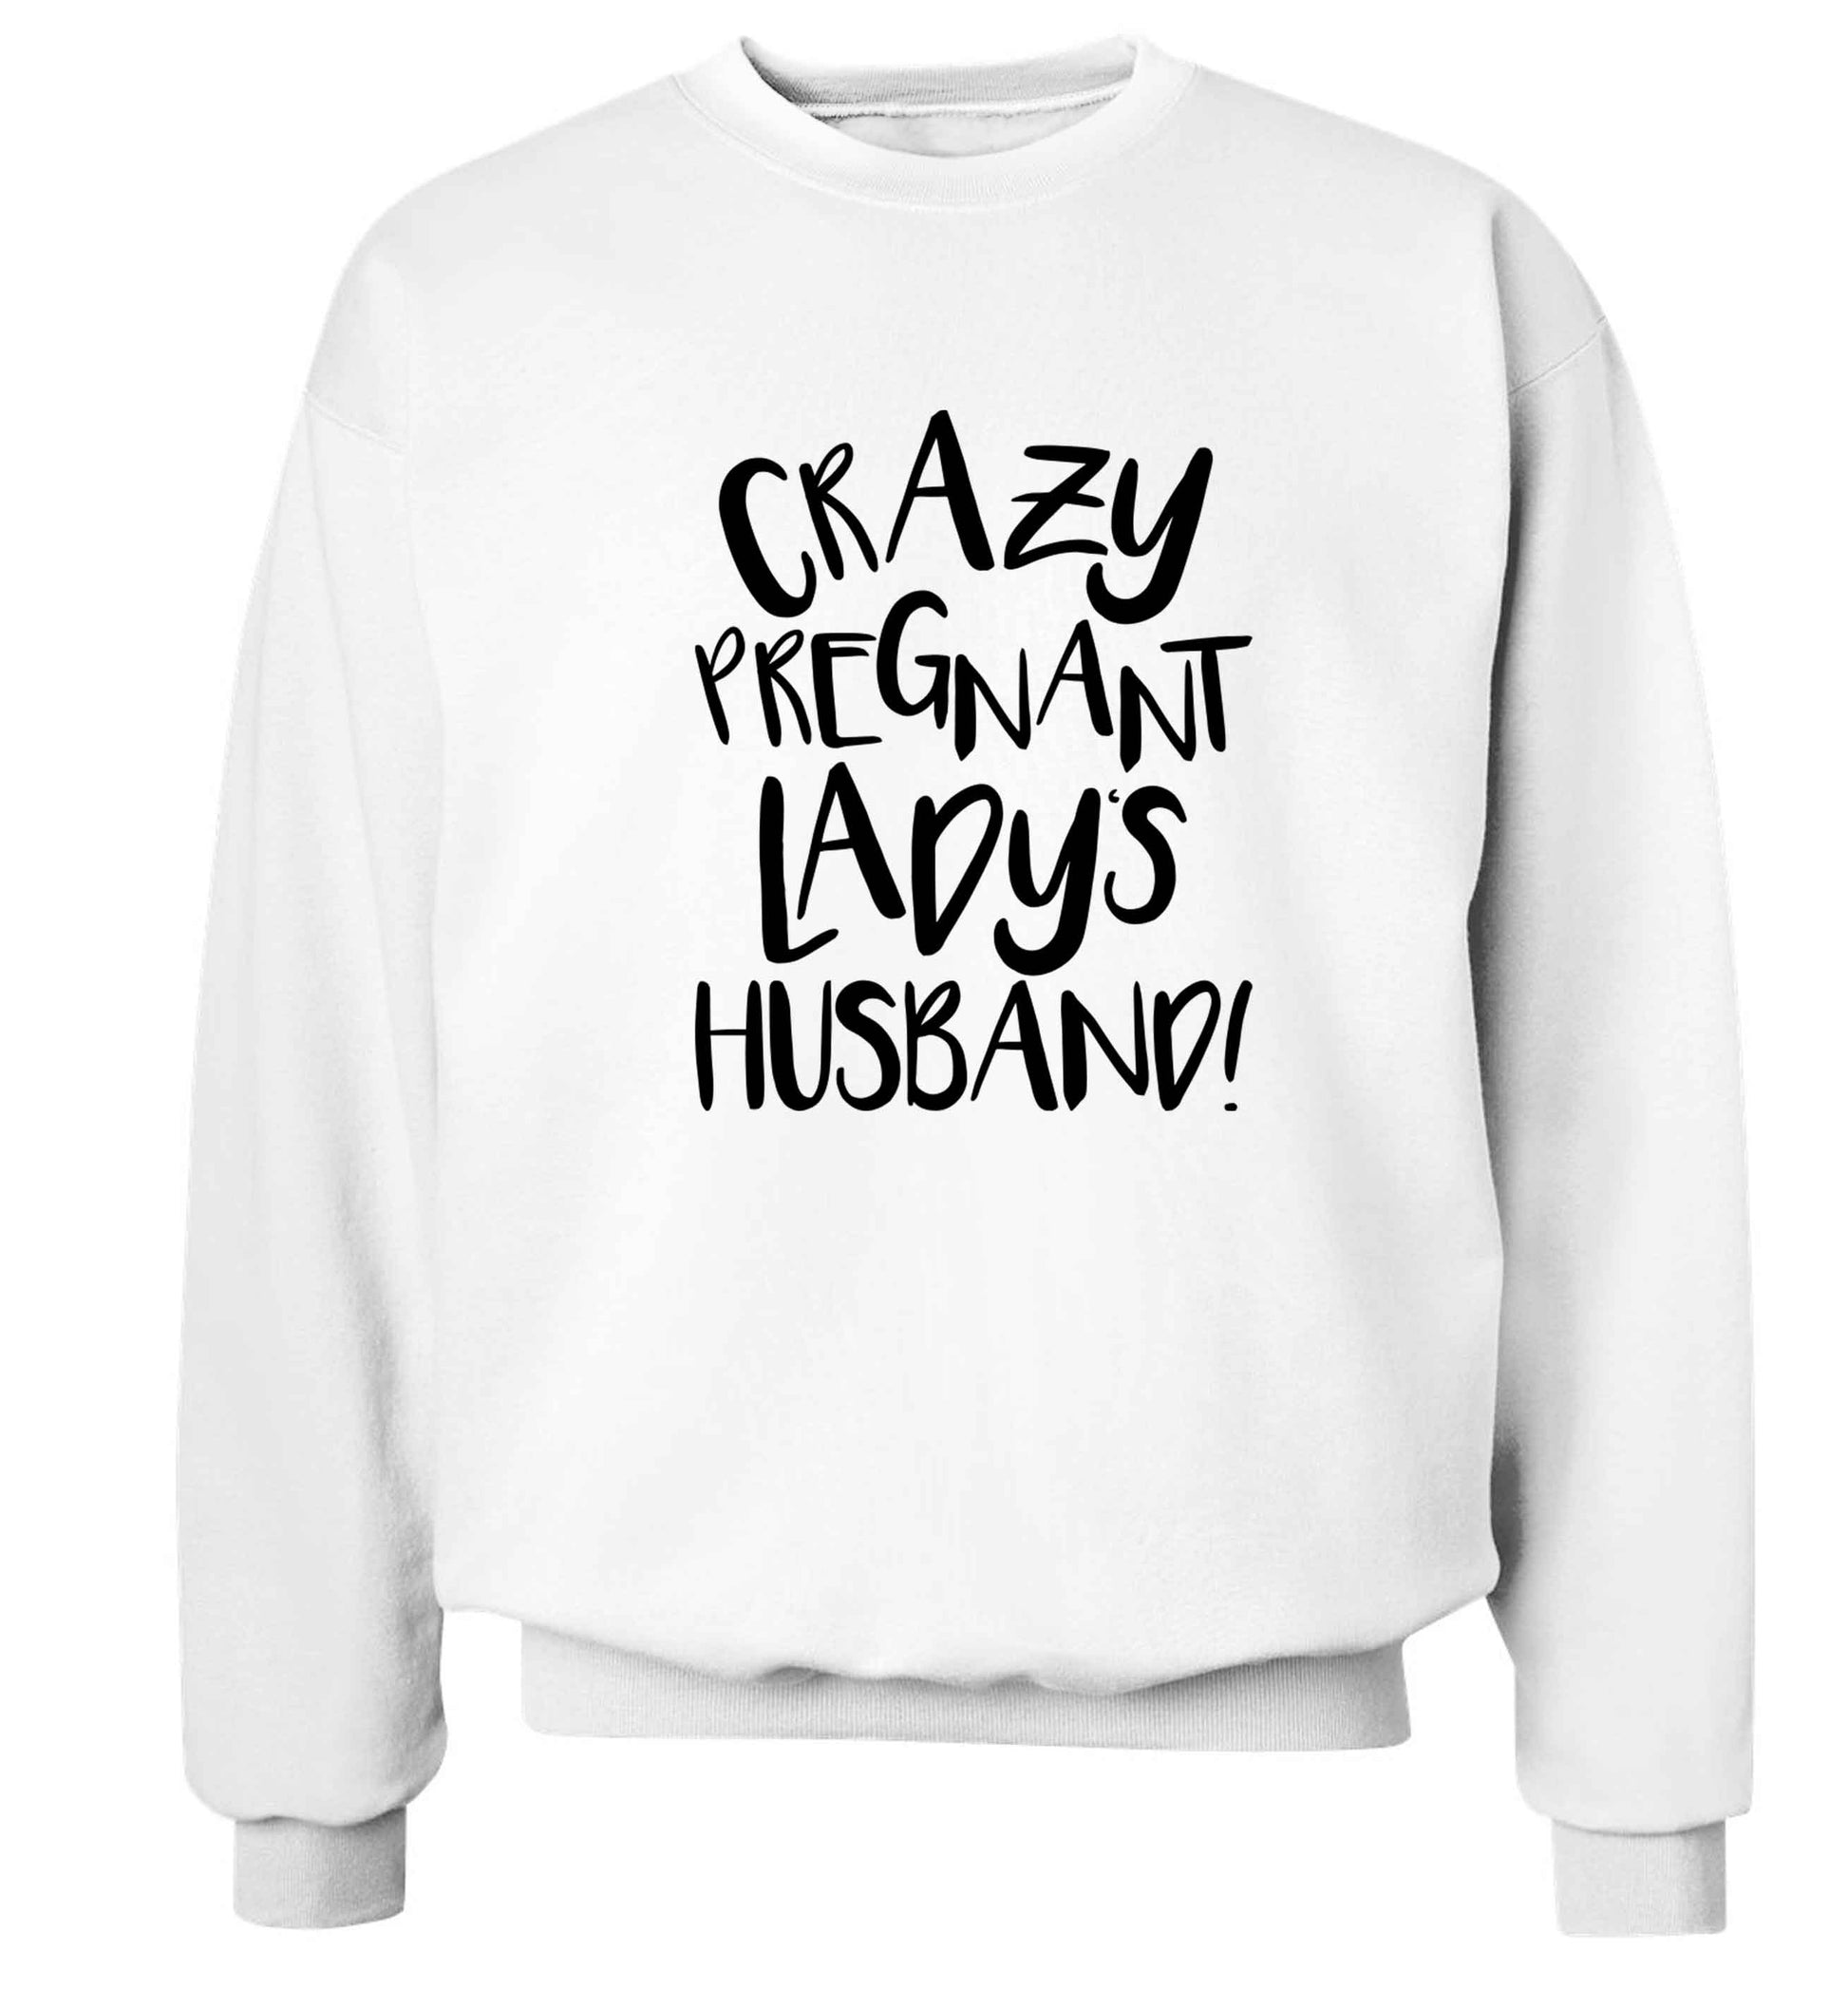 Crazy pregnant lady's husband Adult's unisex white Sweater 2XL